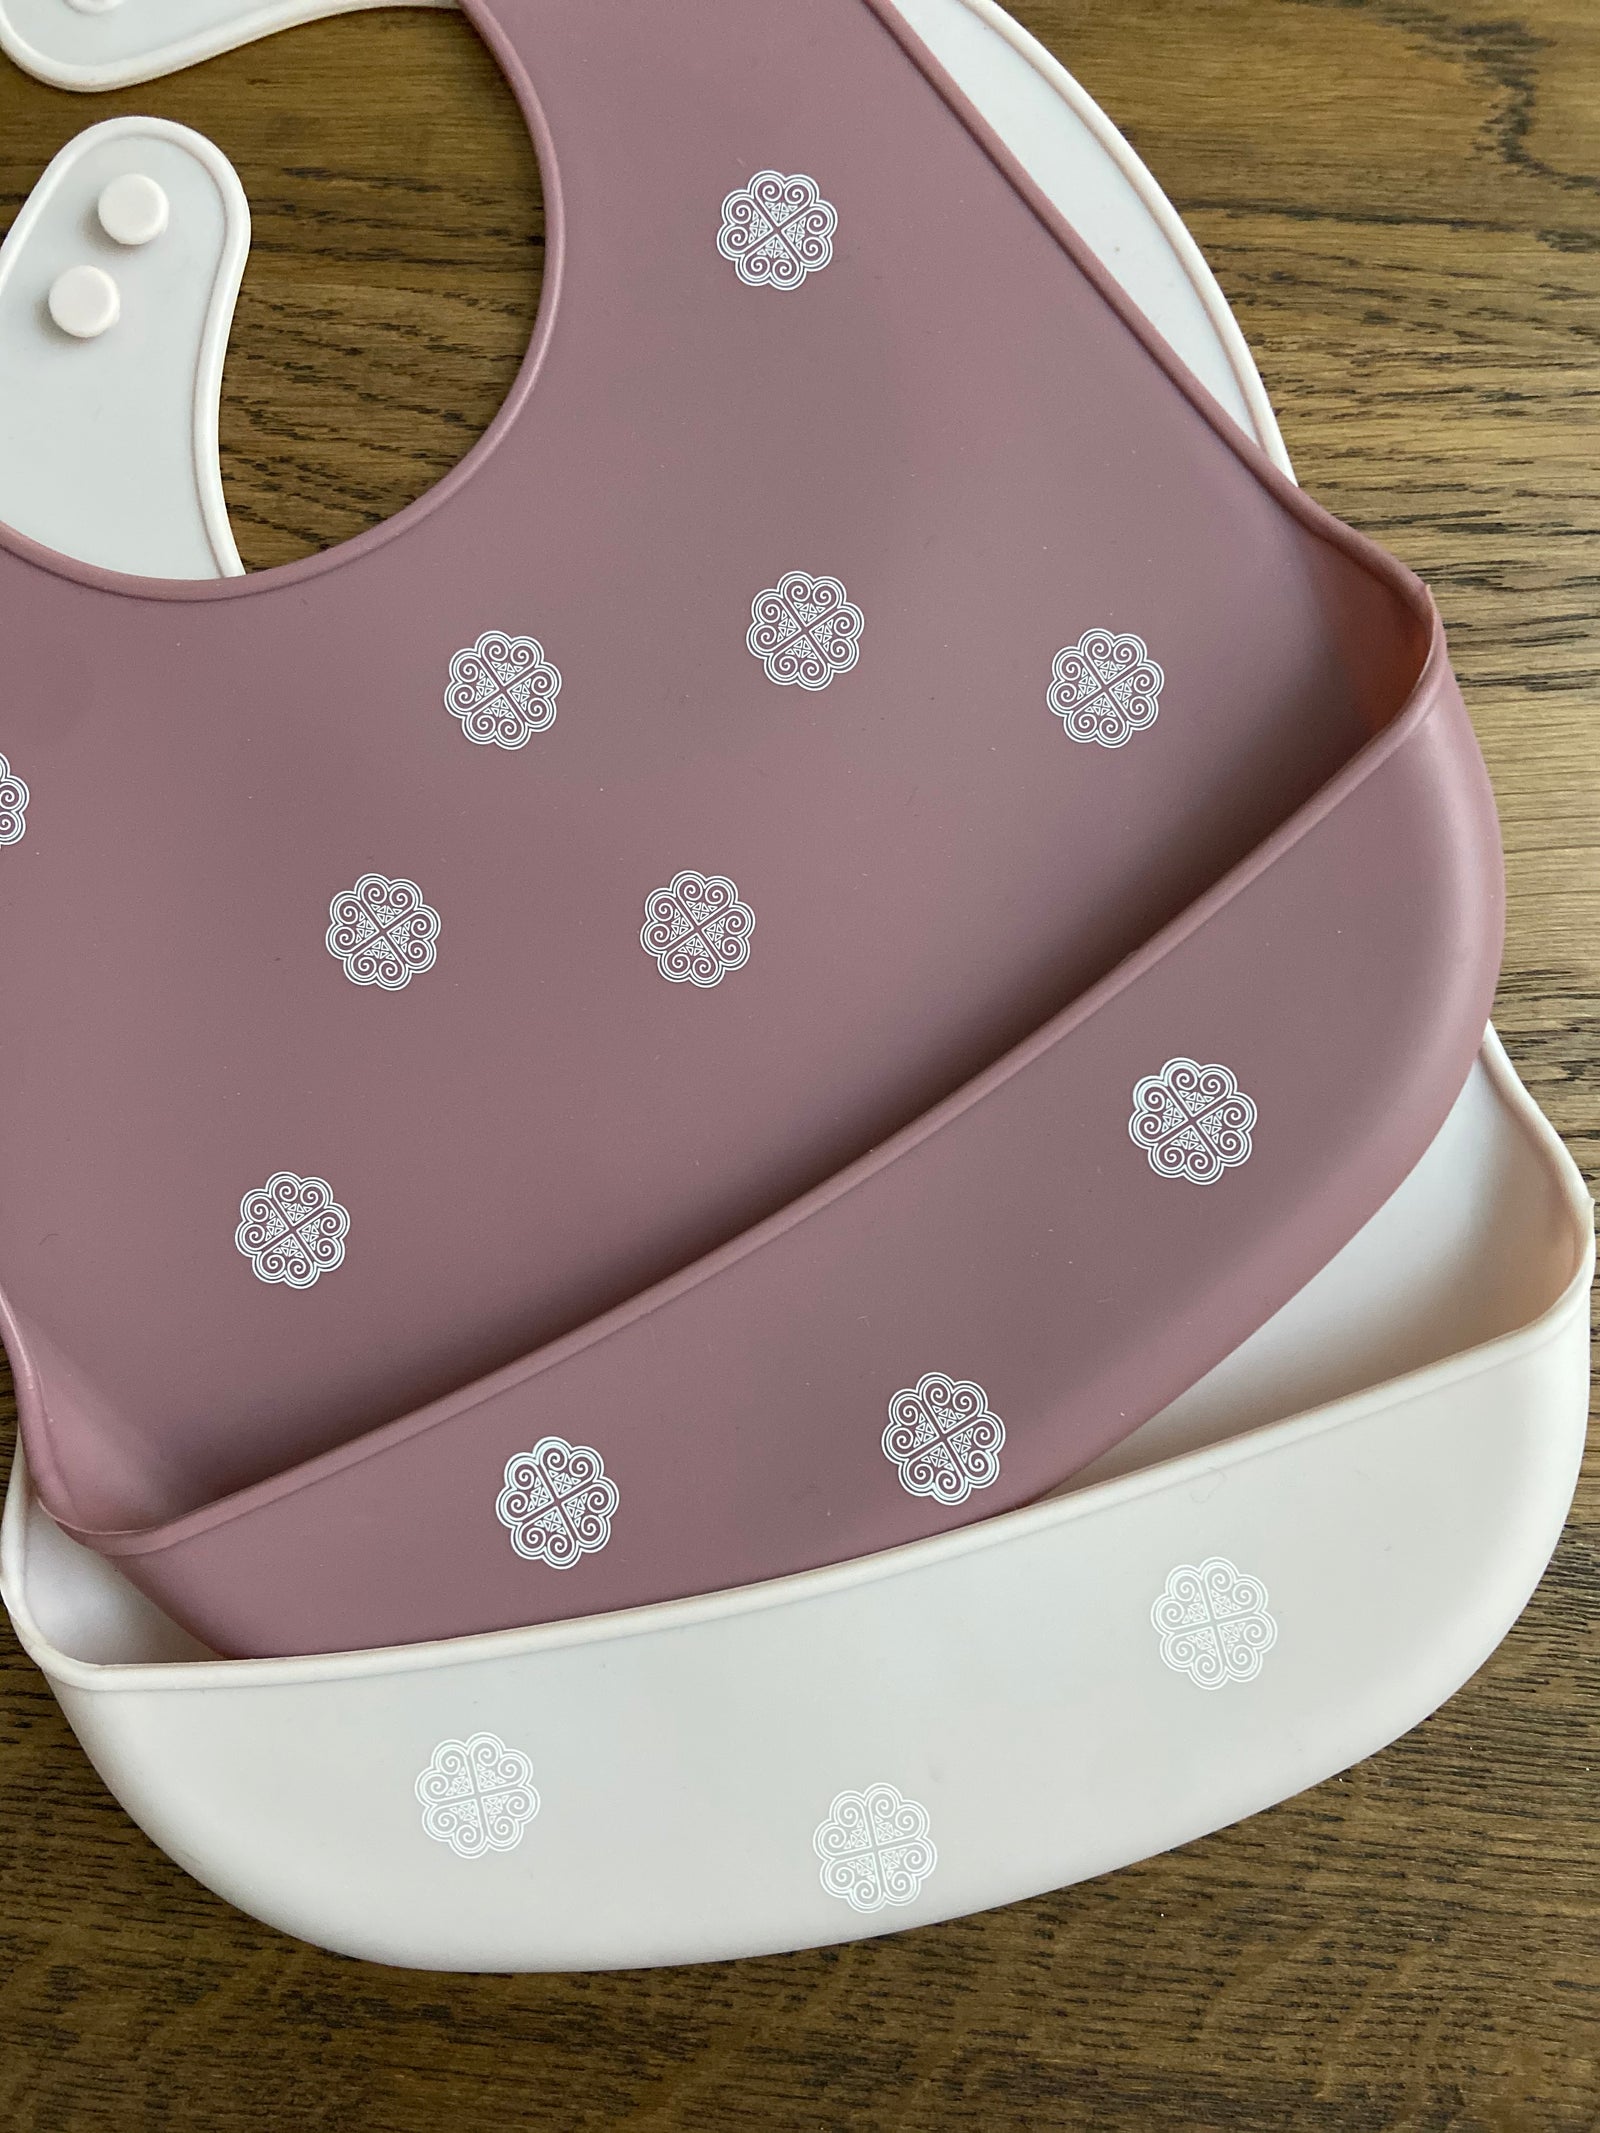 Why Choose Silicone Bibs?